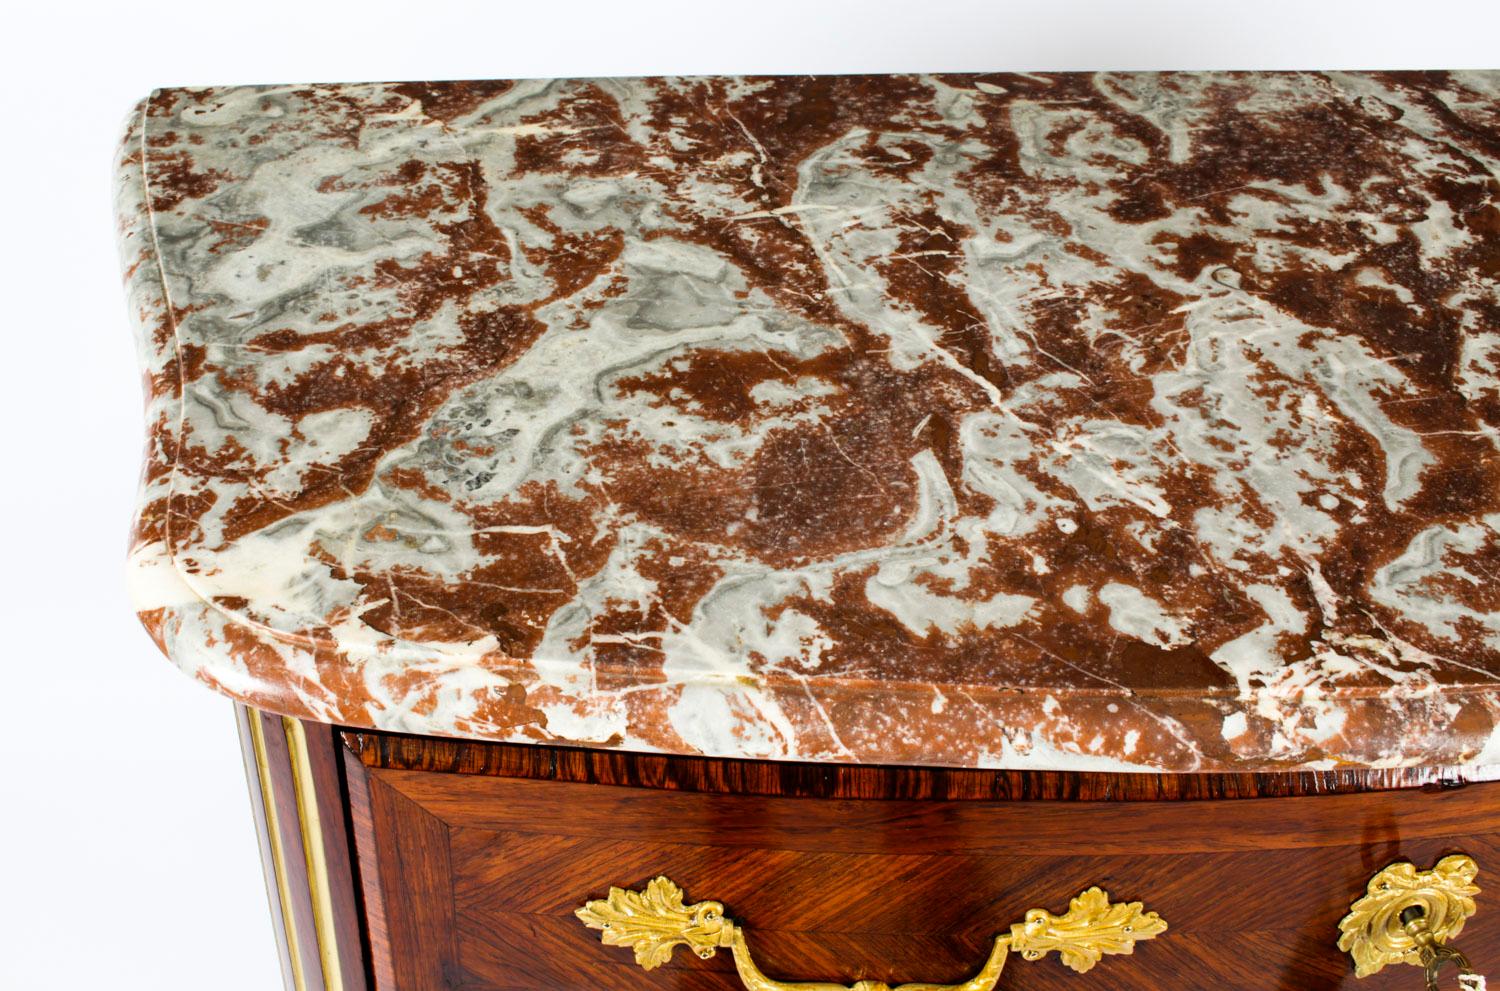 Late 19th Century Antique Marble Topped Ormolu-Mounted Goncalo Alves Commode Chest, 19th Century